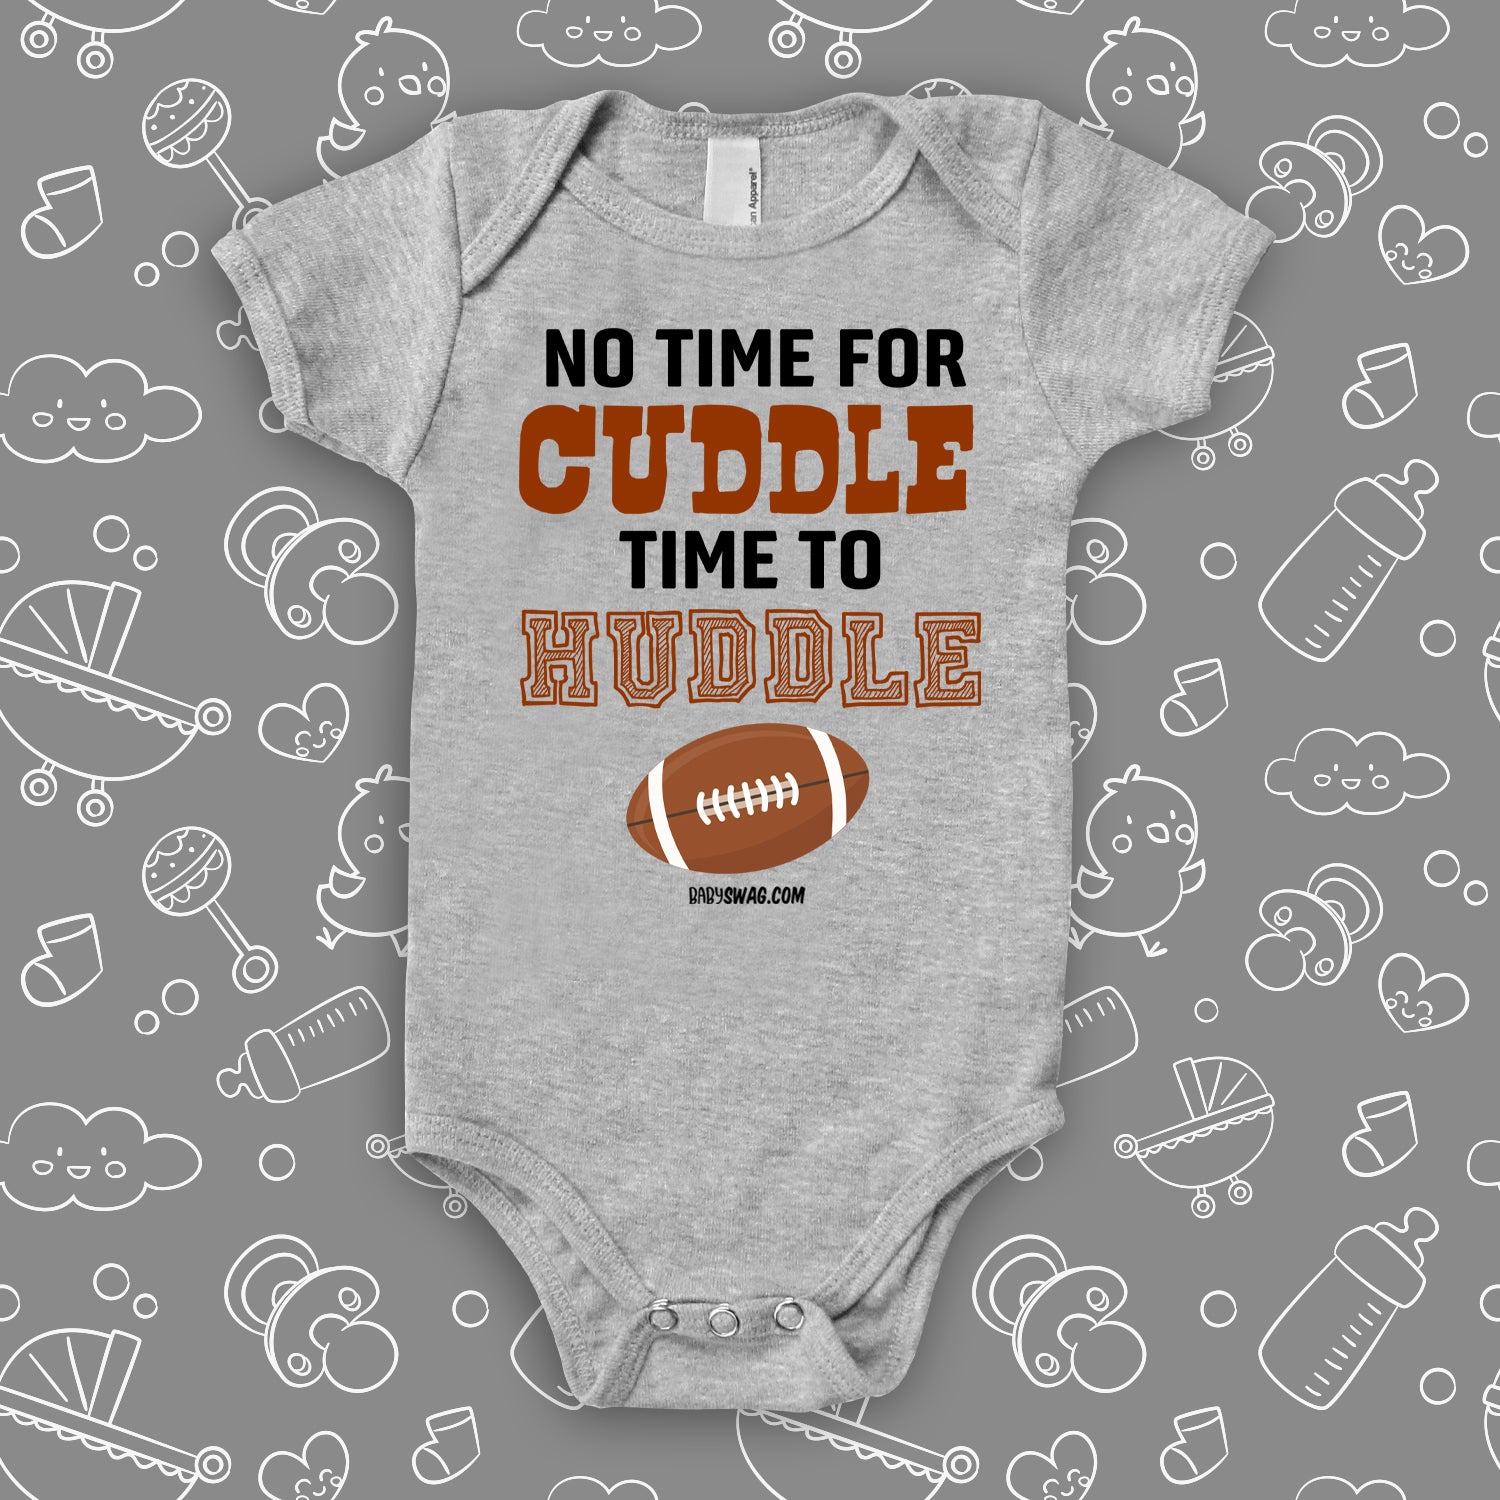 Cute baby onesies with saying "No Time For Cuddle Time to Huddle" in grey. 